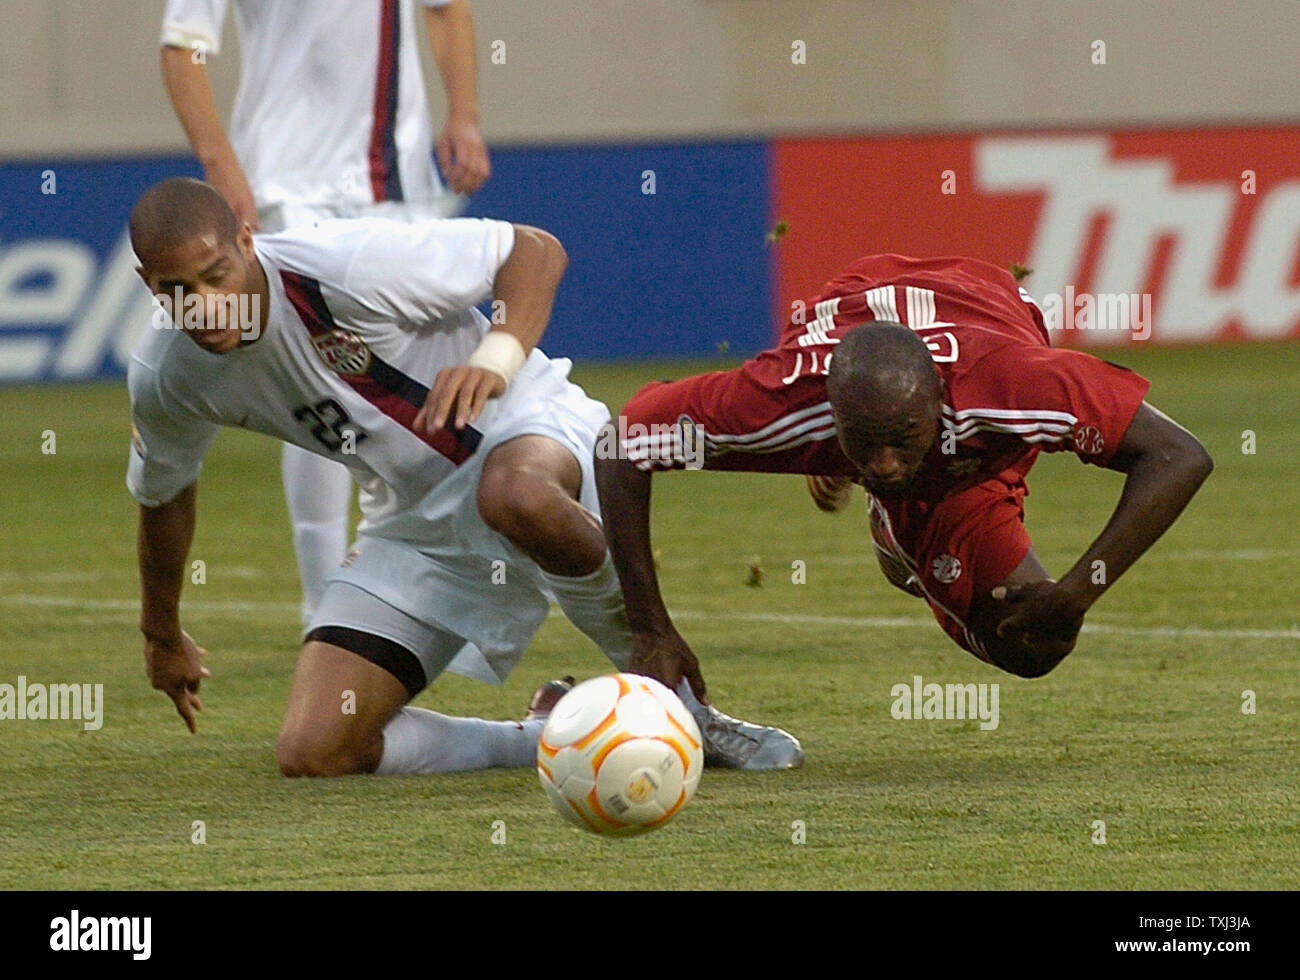 Canada's Ali Gerba (R) battles United States' Oguchi Onyewu (L) for the ball during the second half of the CONCACAF Gold Cup semifinal match at Soldier Field in Chicago on June 21, 2007. The United States won 2-1.  (UPI Photo/John Sommers II) Stock Photo